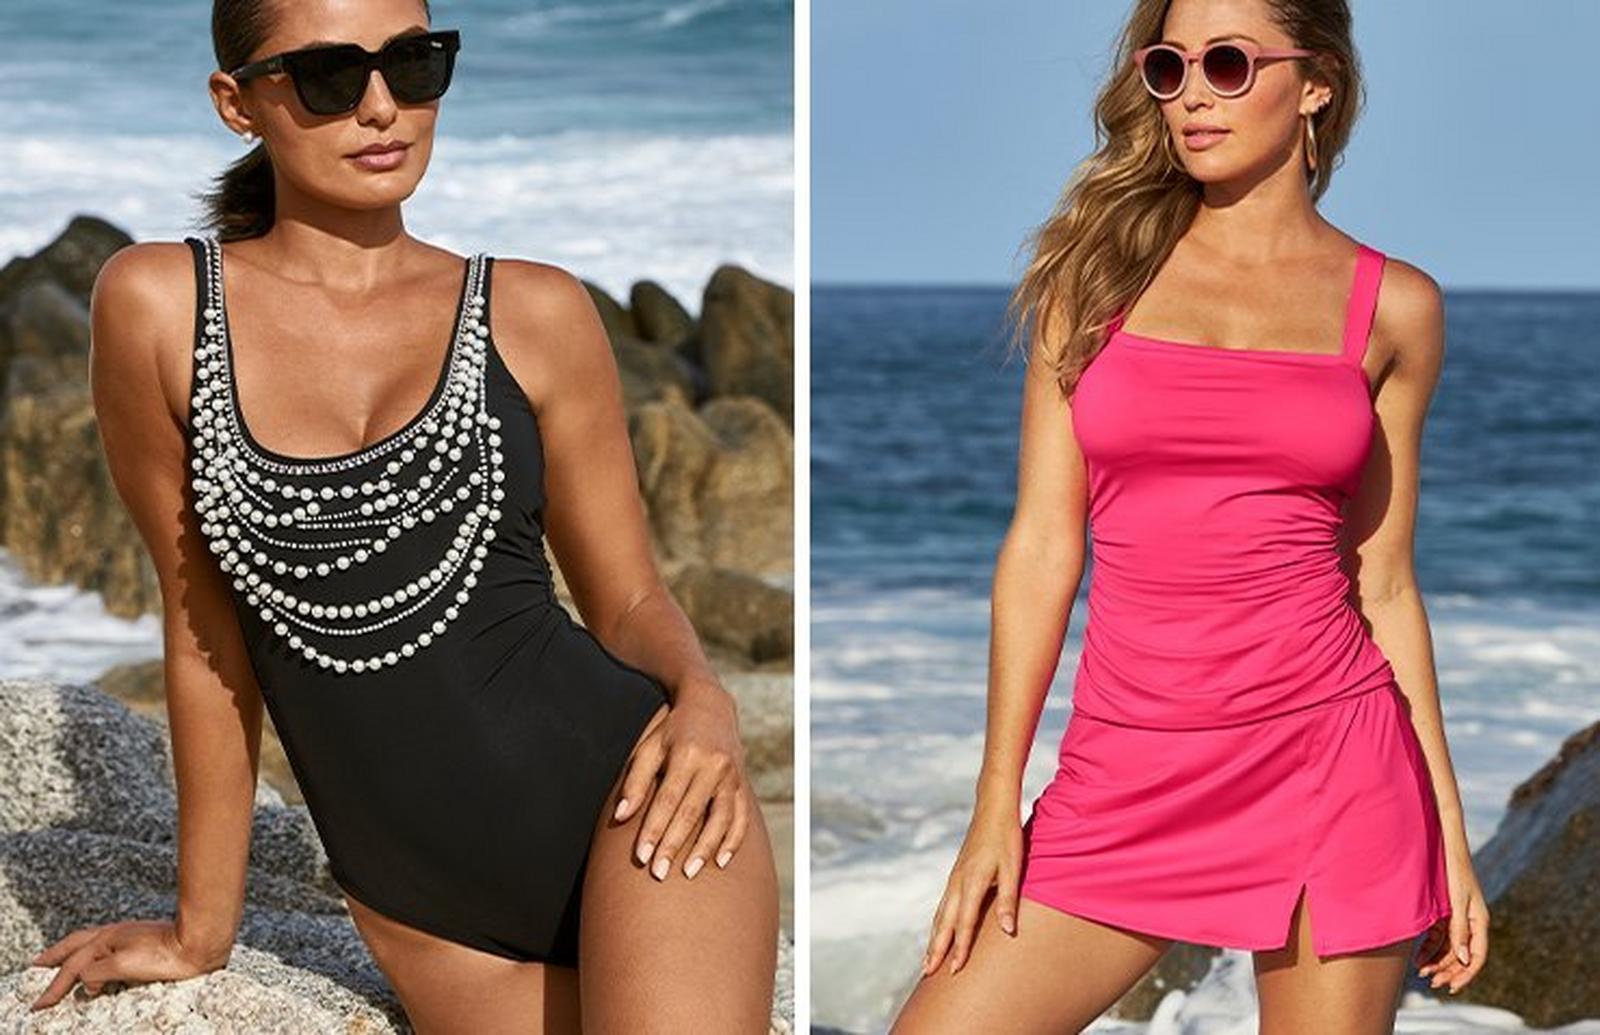 left model wearing a black pearl embellished one-piece swimsuit and sunglasses. right model wearing a pink tankini with a skirted bottom and sunglasses.